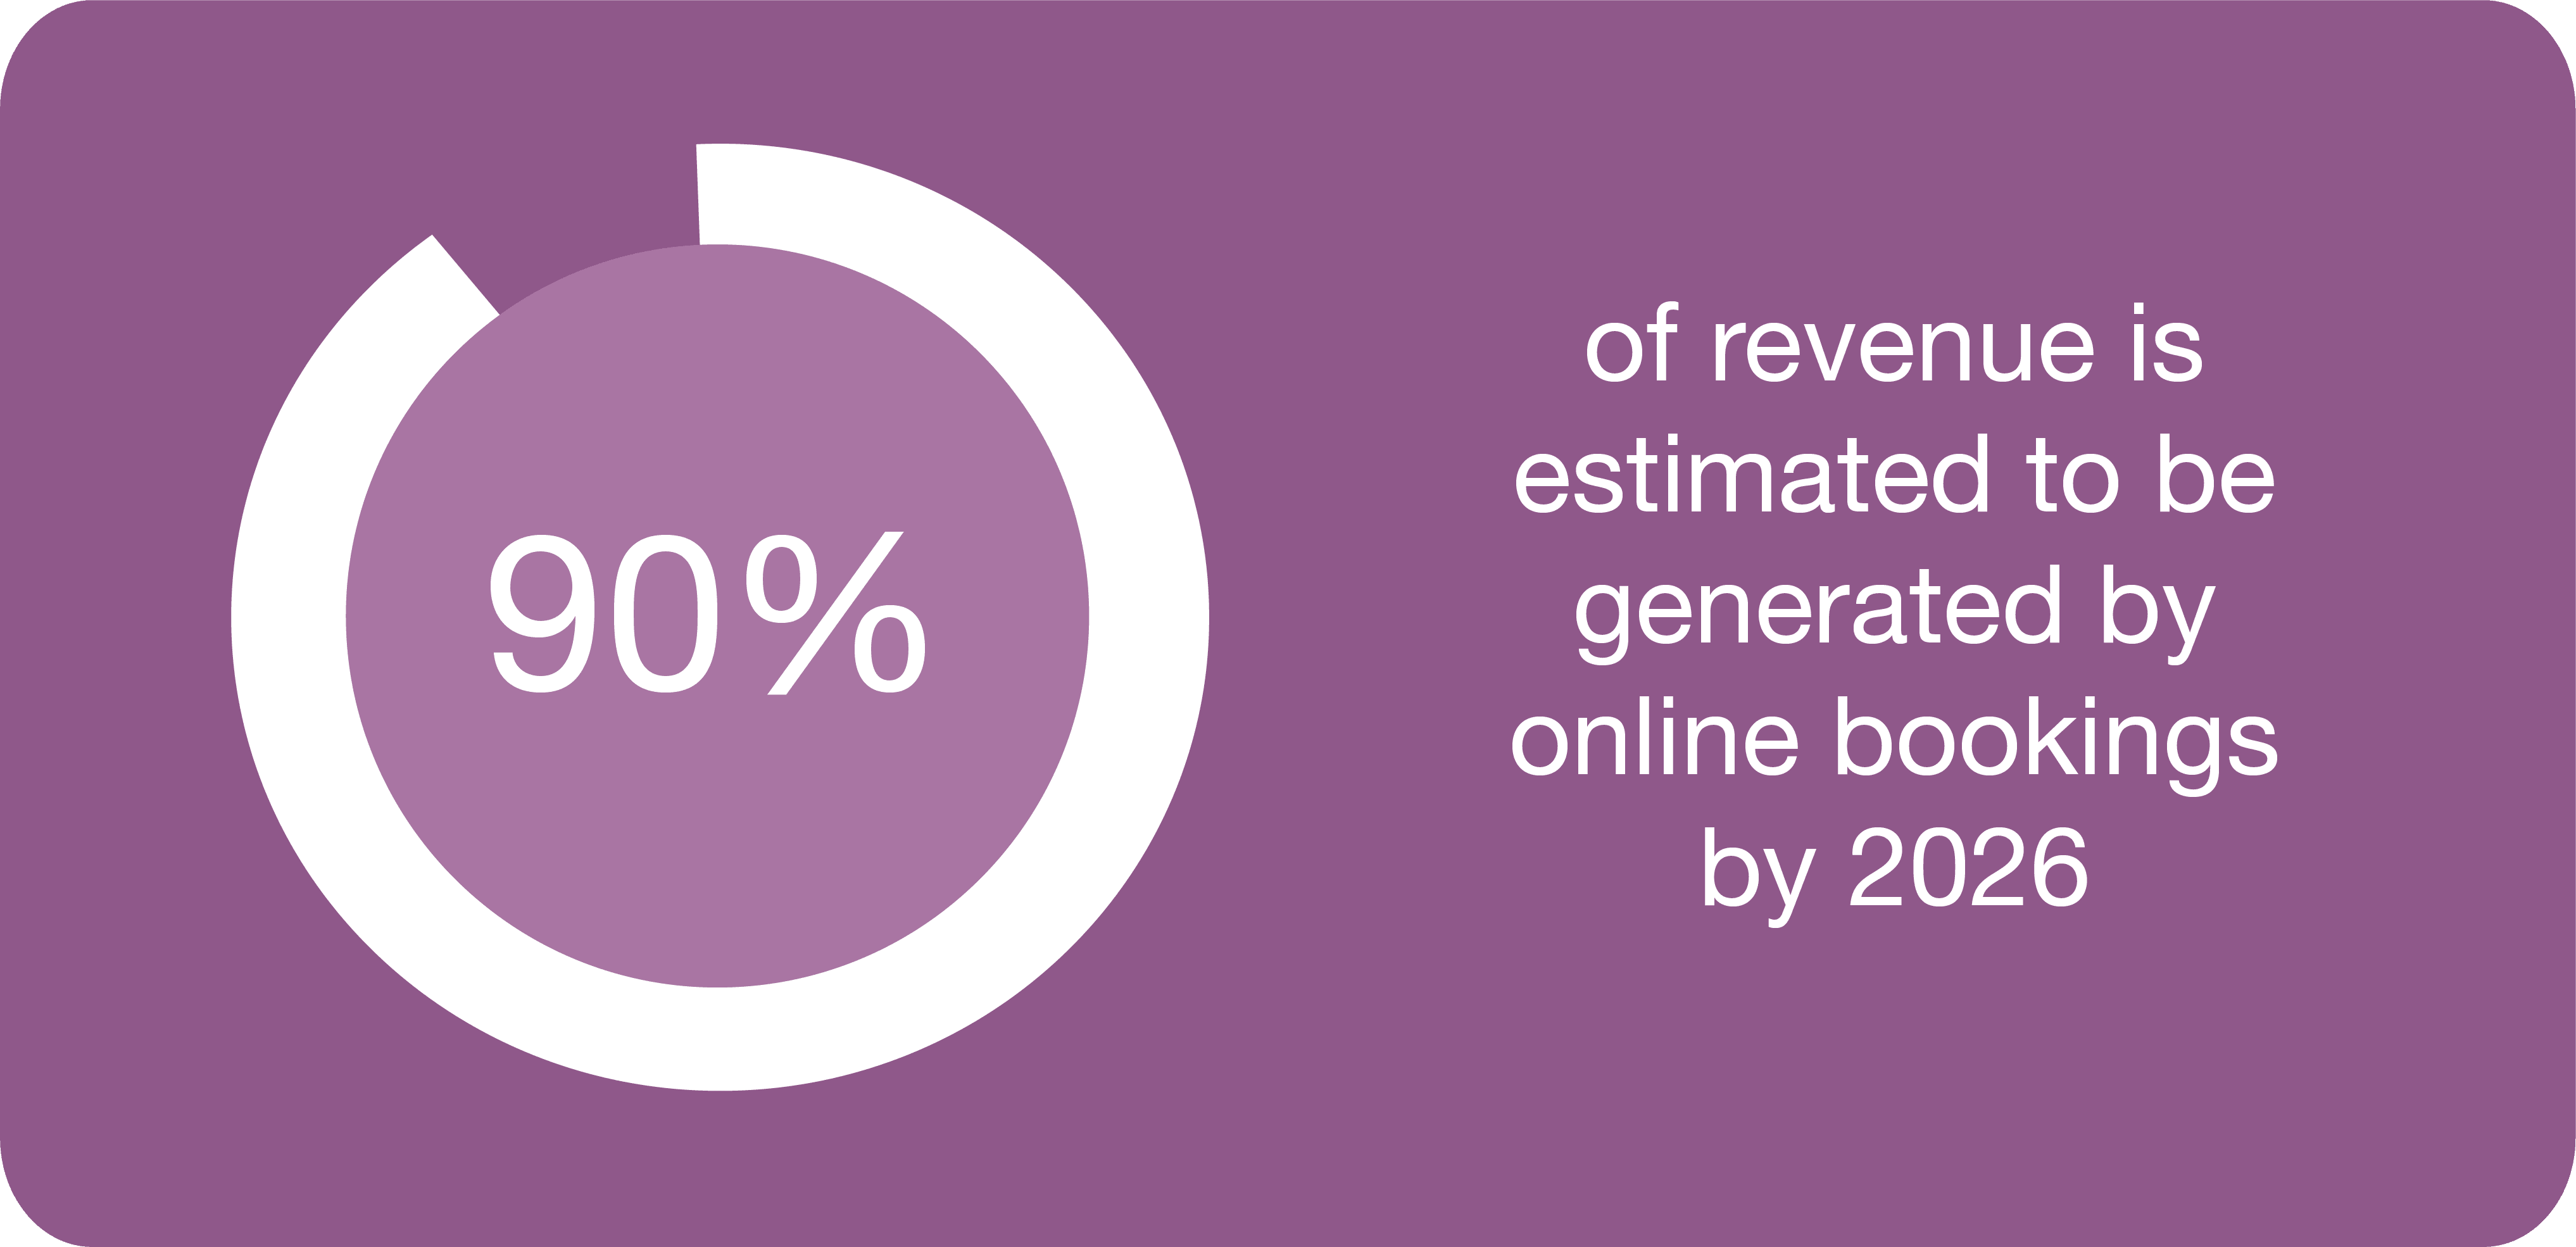 90% of revenue is estimated to be generated by online bookings by 2026